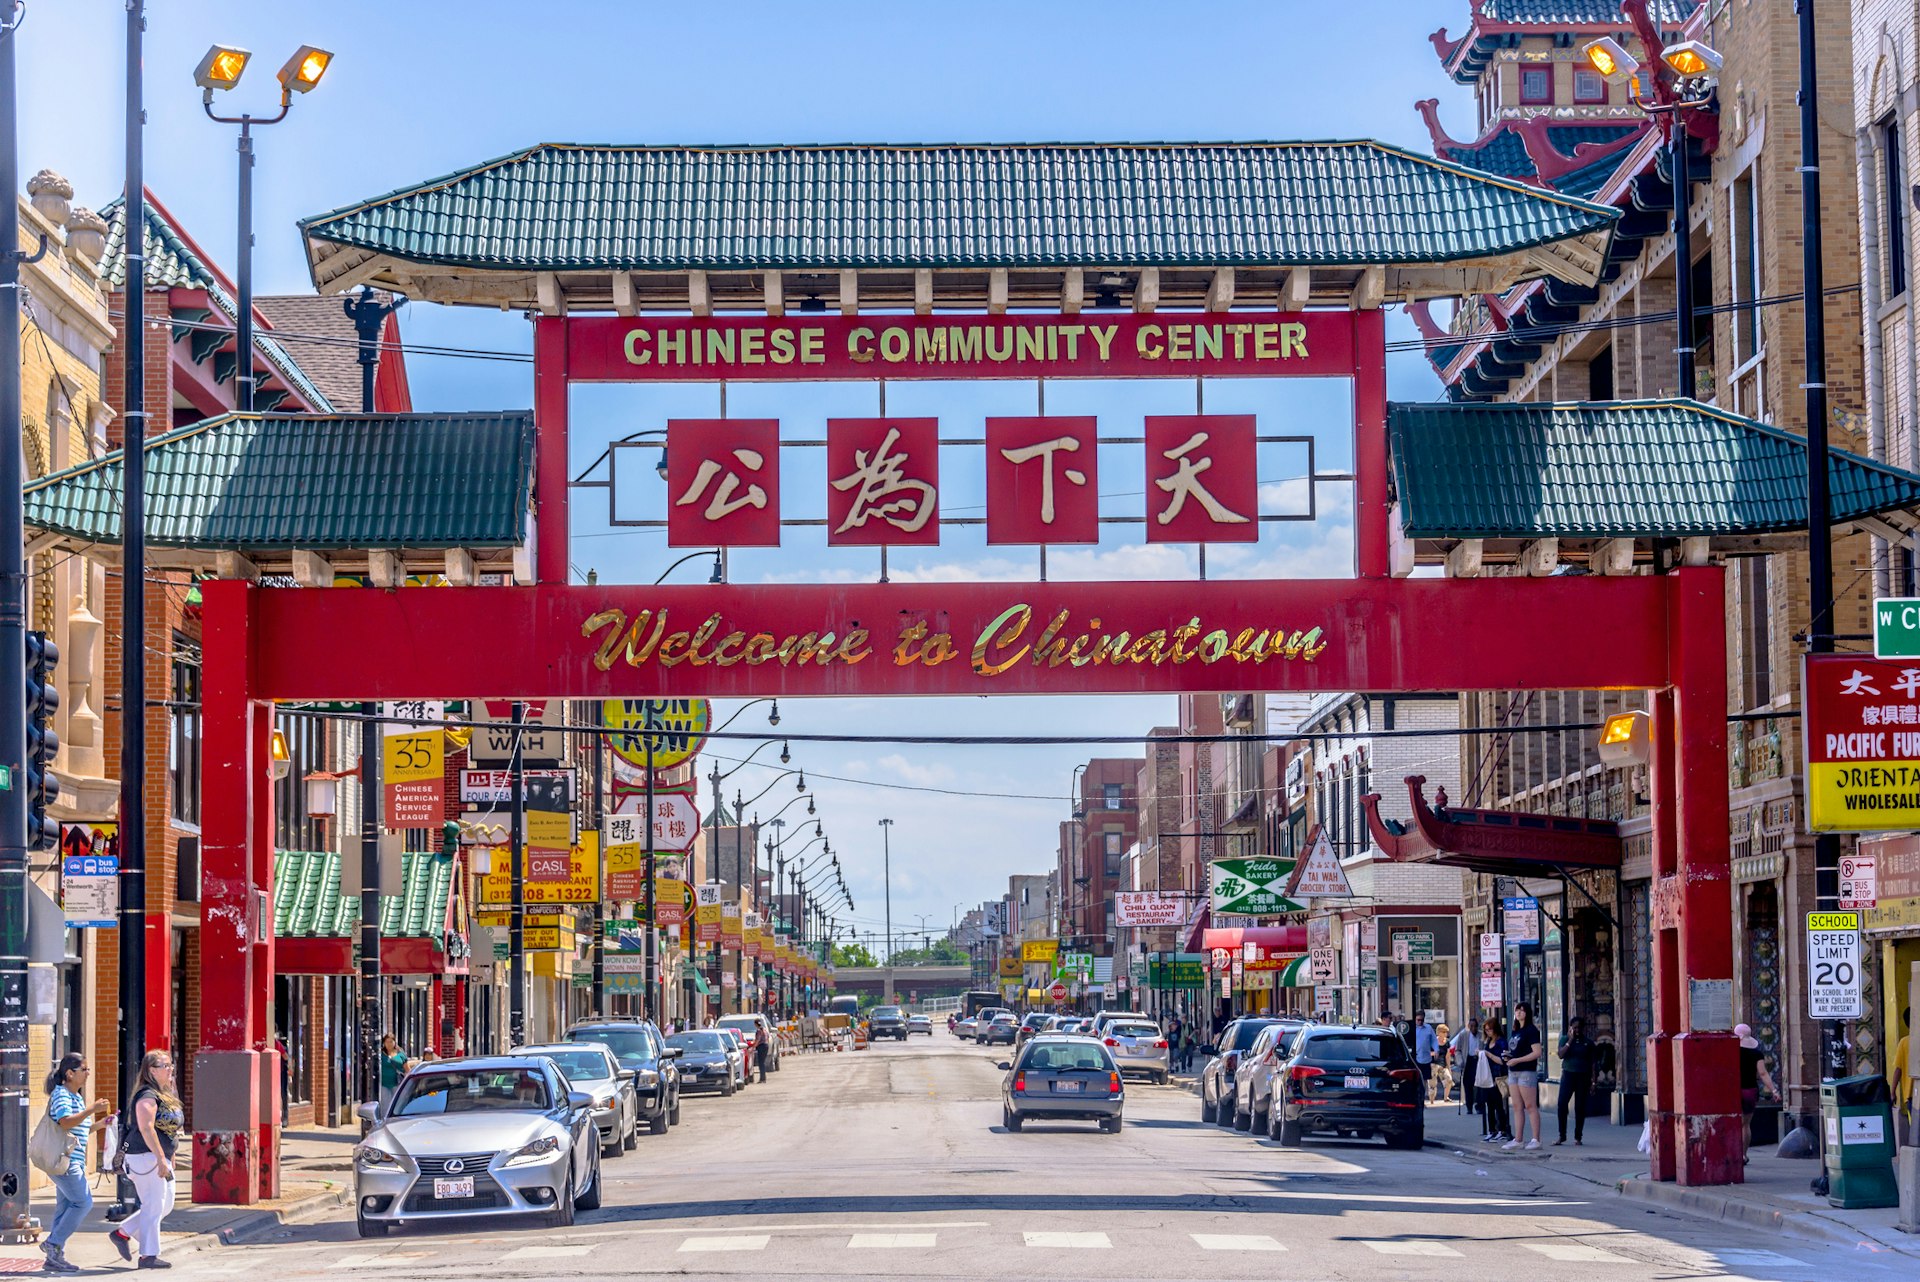 The Chinatown Gate in Chicago, Illinois